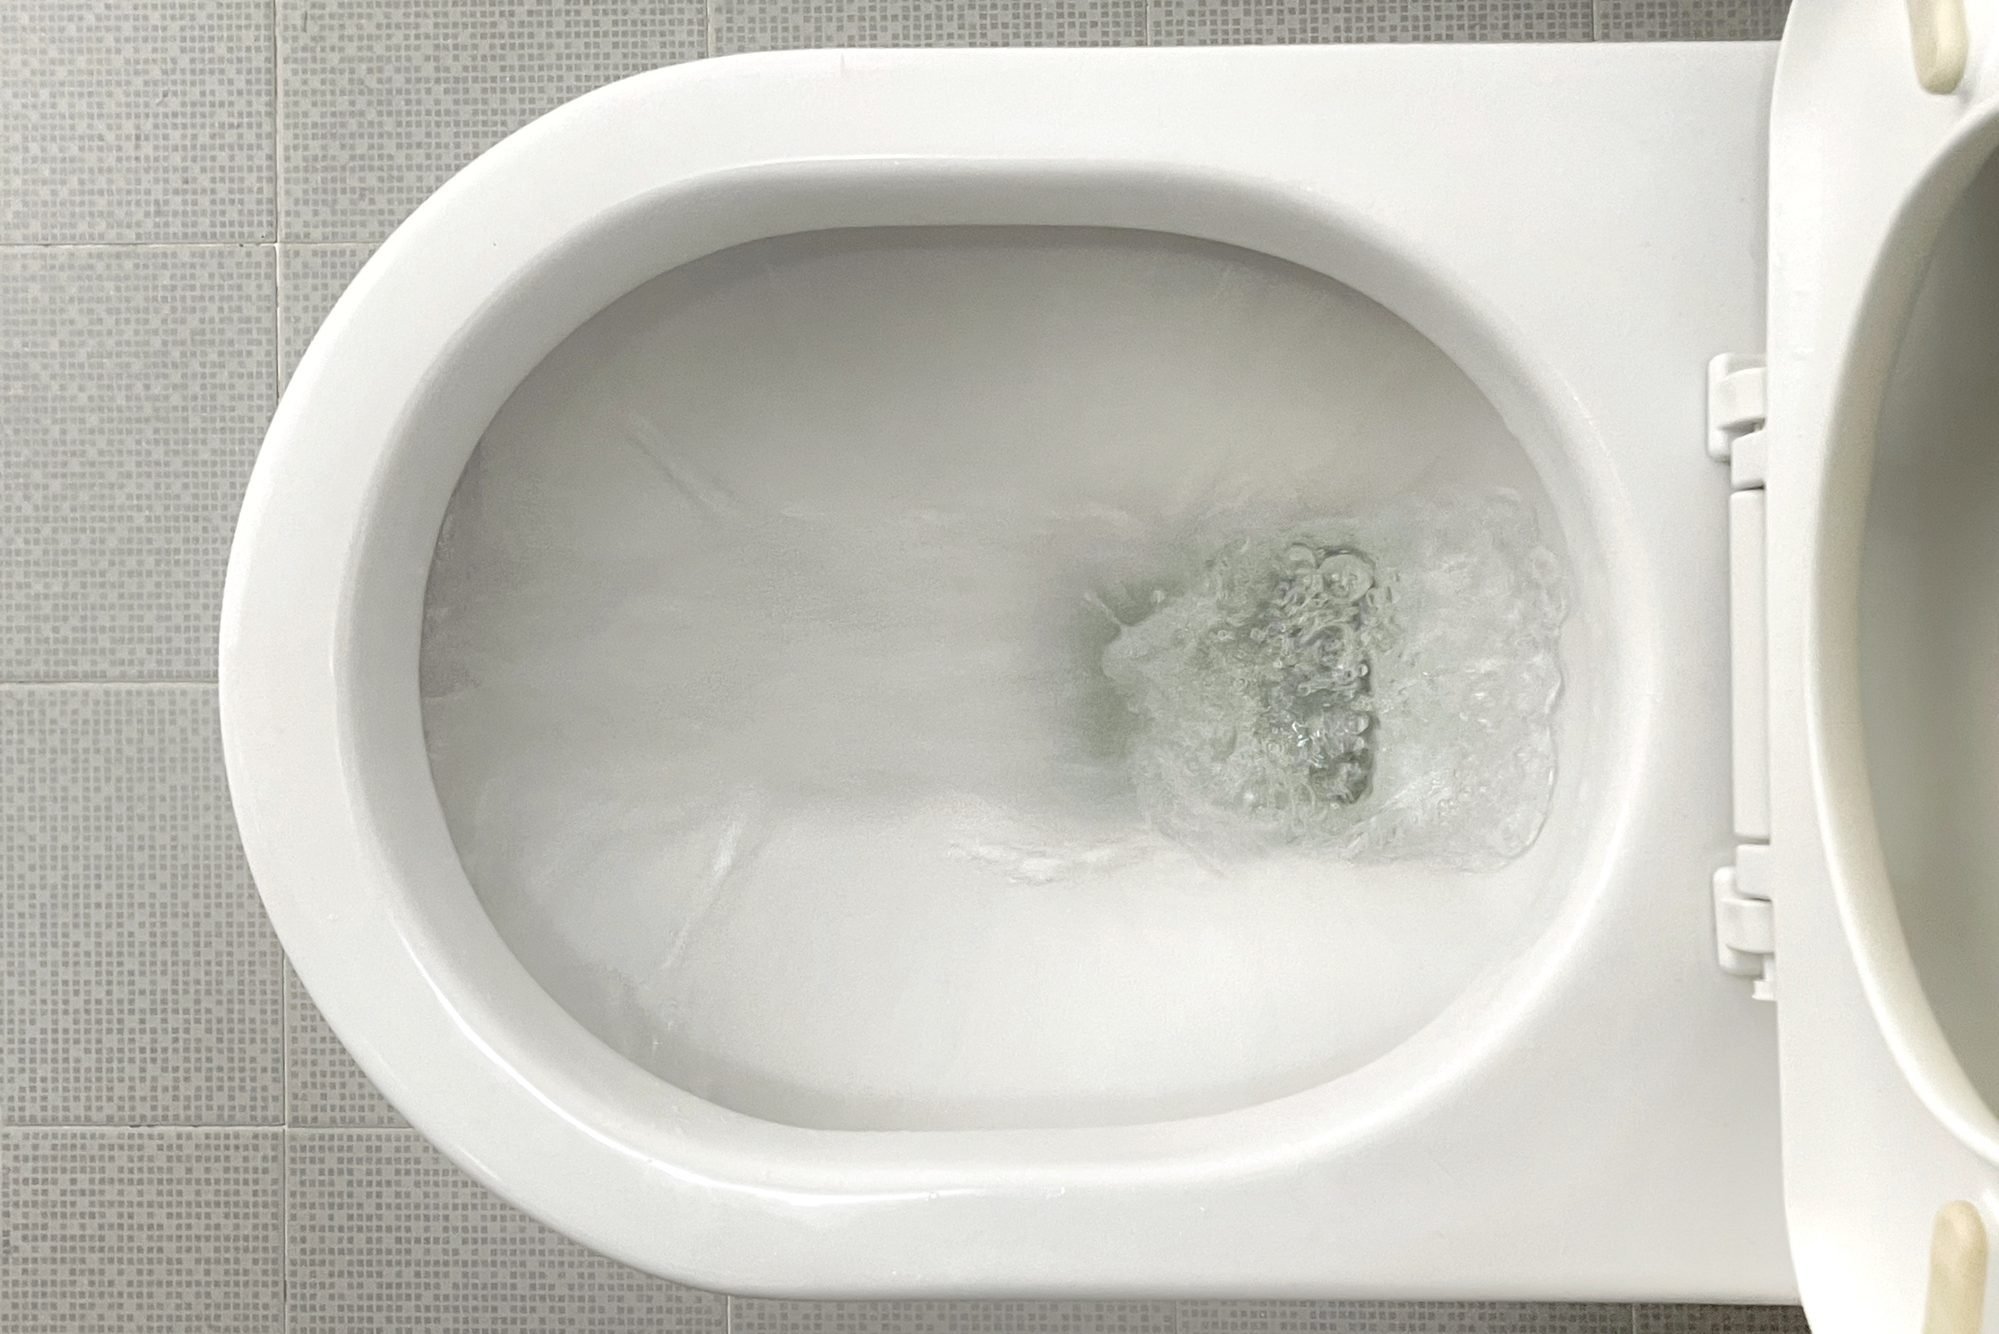 6 Things That Can Cause Bright Yellow or Green Pee, from Urologists